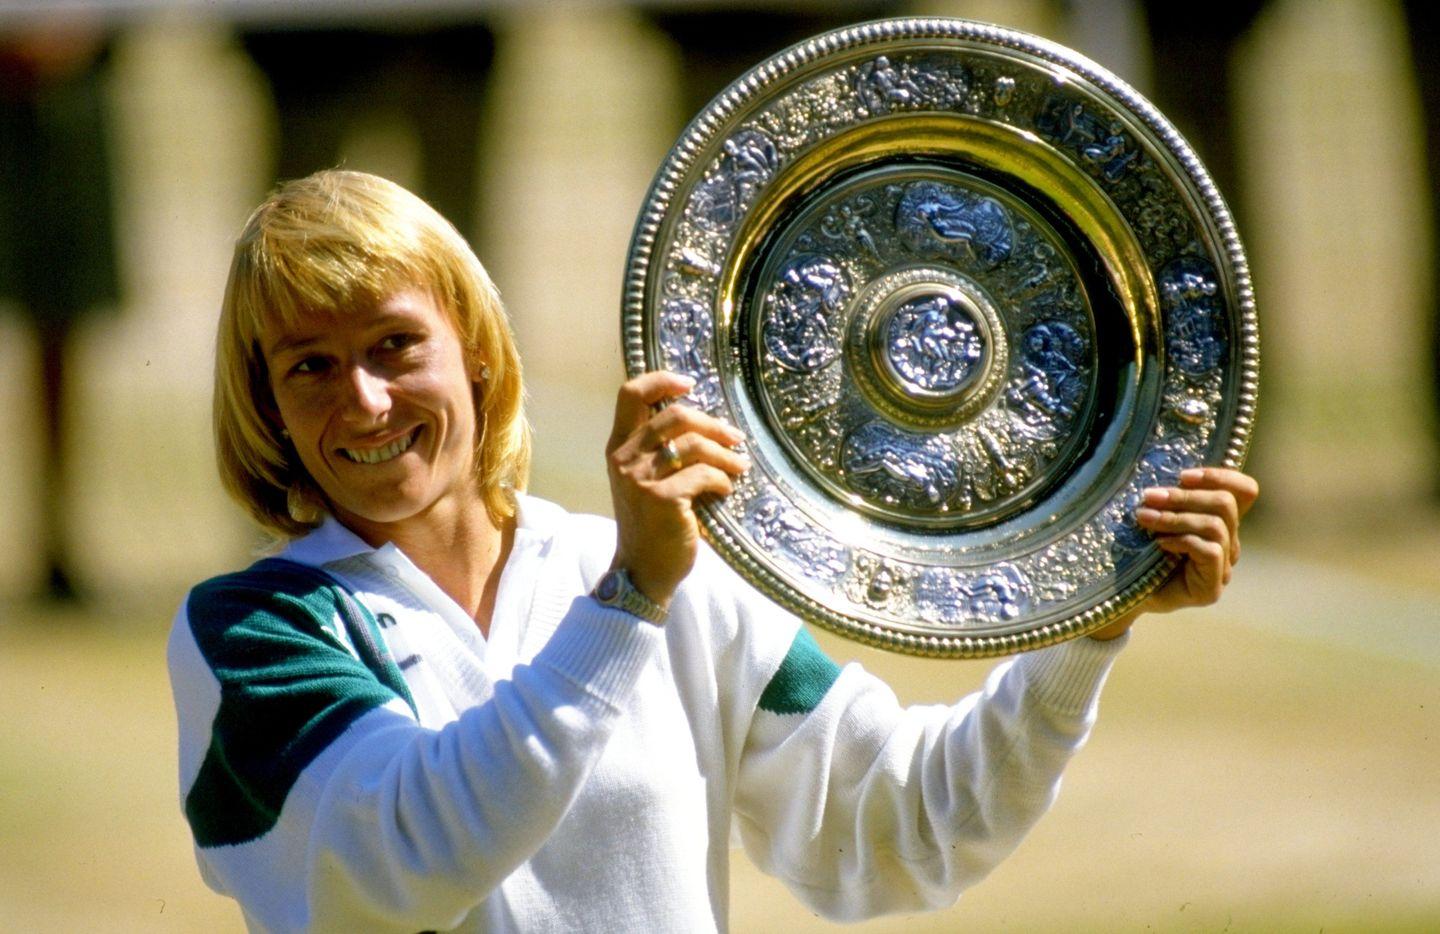 Winning at Wimbledon: The most titles in Open Era and beyond